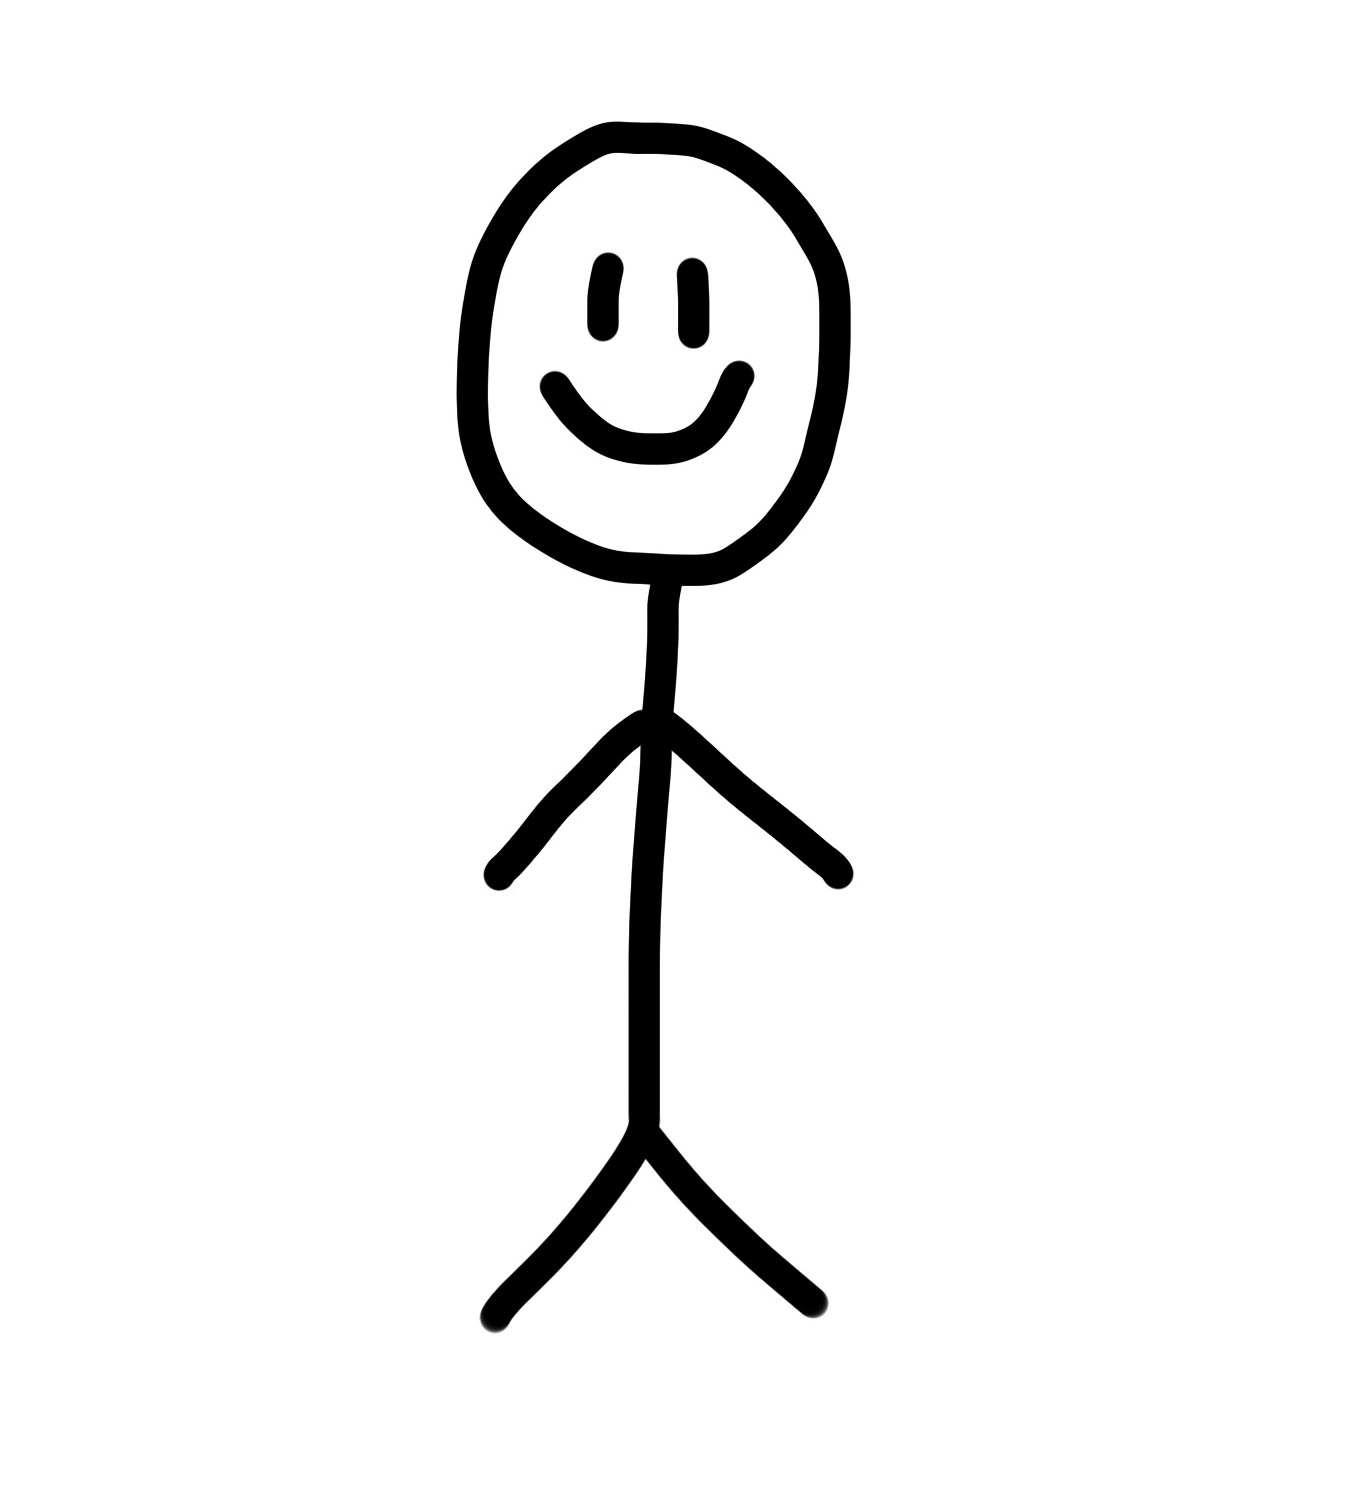 Stick Man wallpapers, Movie, HQ Stick Man pictures | 4K Wallpapers 2019